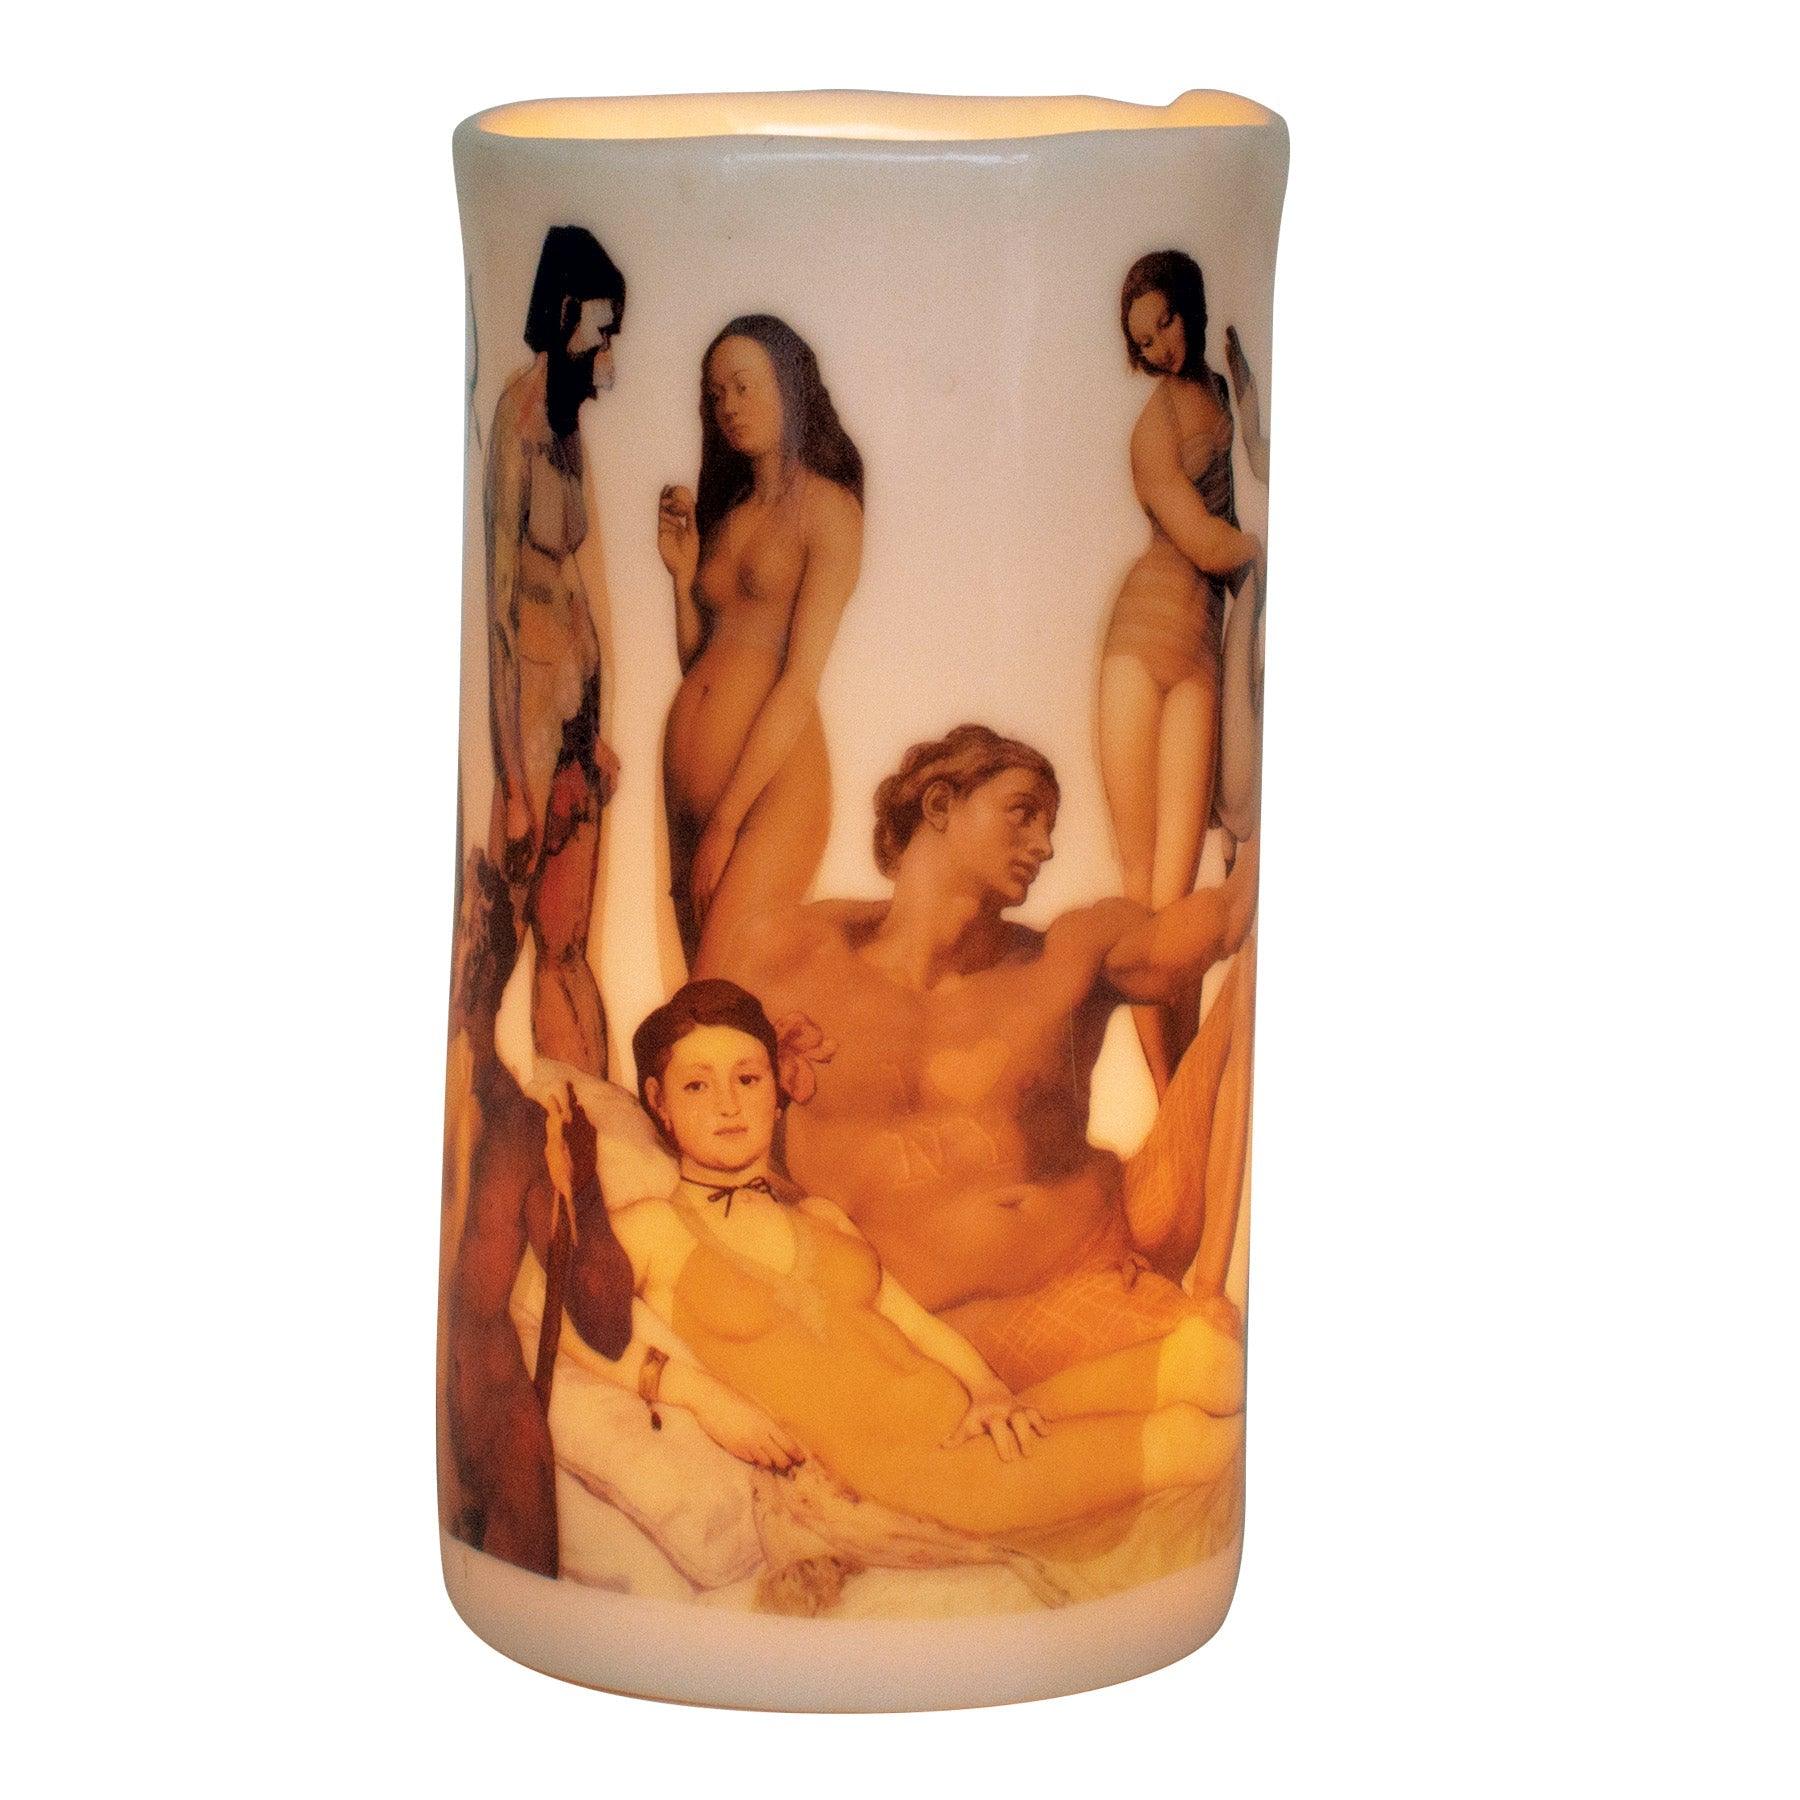 Product photo of Nudes of Art Transforming Tealight Holder, a novelty gift manufactured by The Unemployed Philosophers Guild.